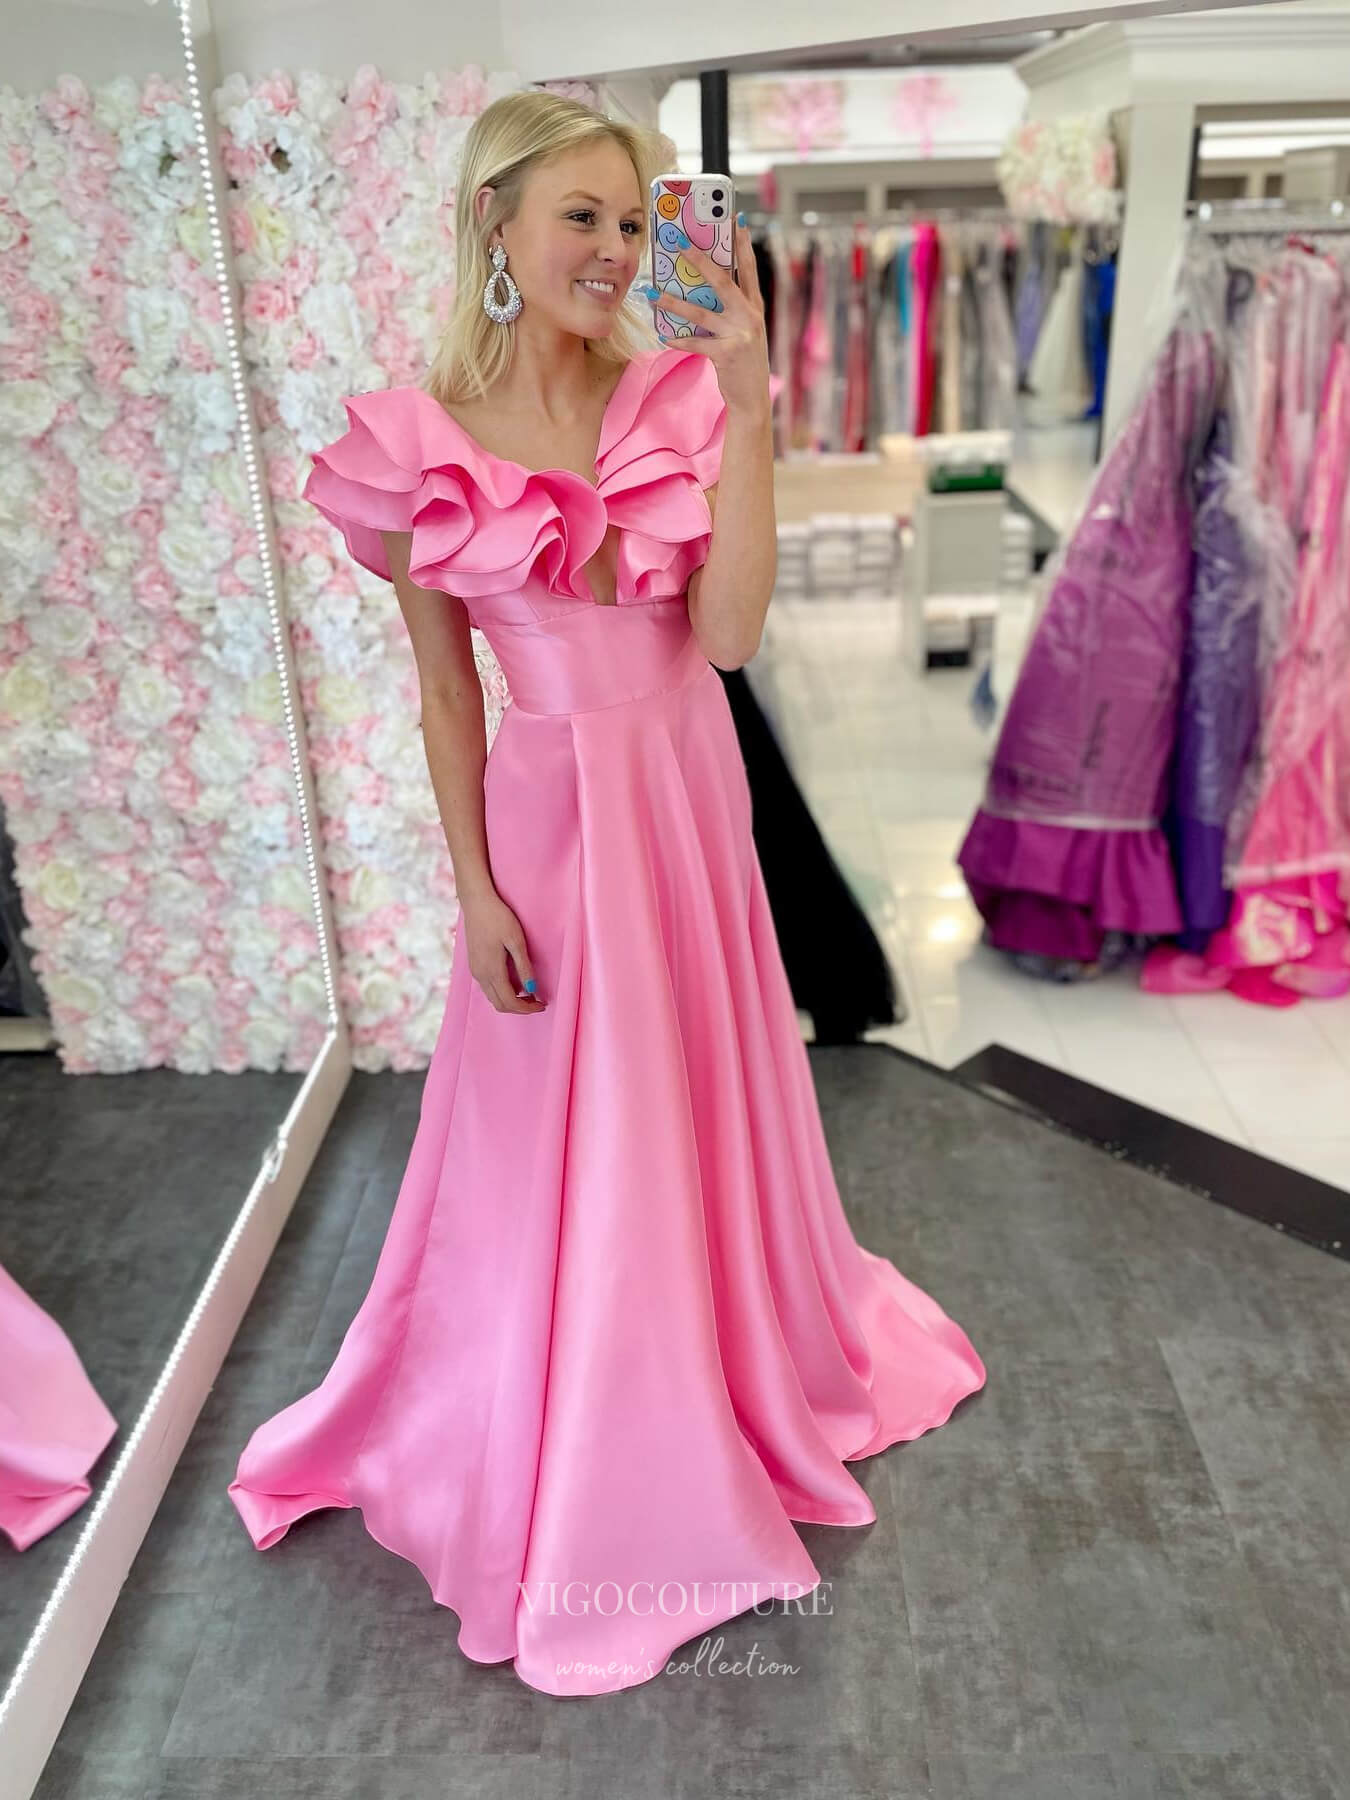 Smooth Satin Cheap Prom Dresses Ruffle Off the Shoulder Formal Gown 24136-Prom Dresses-vigocouture-Pink-Custom Size-vigocouture